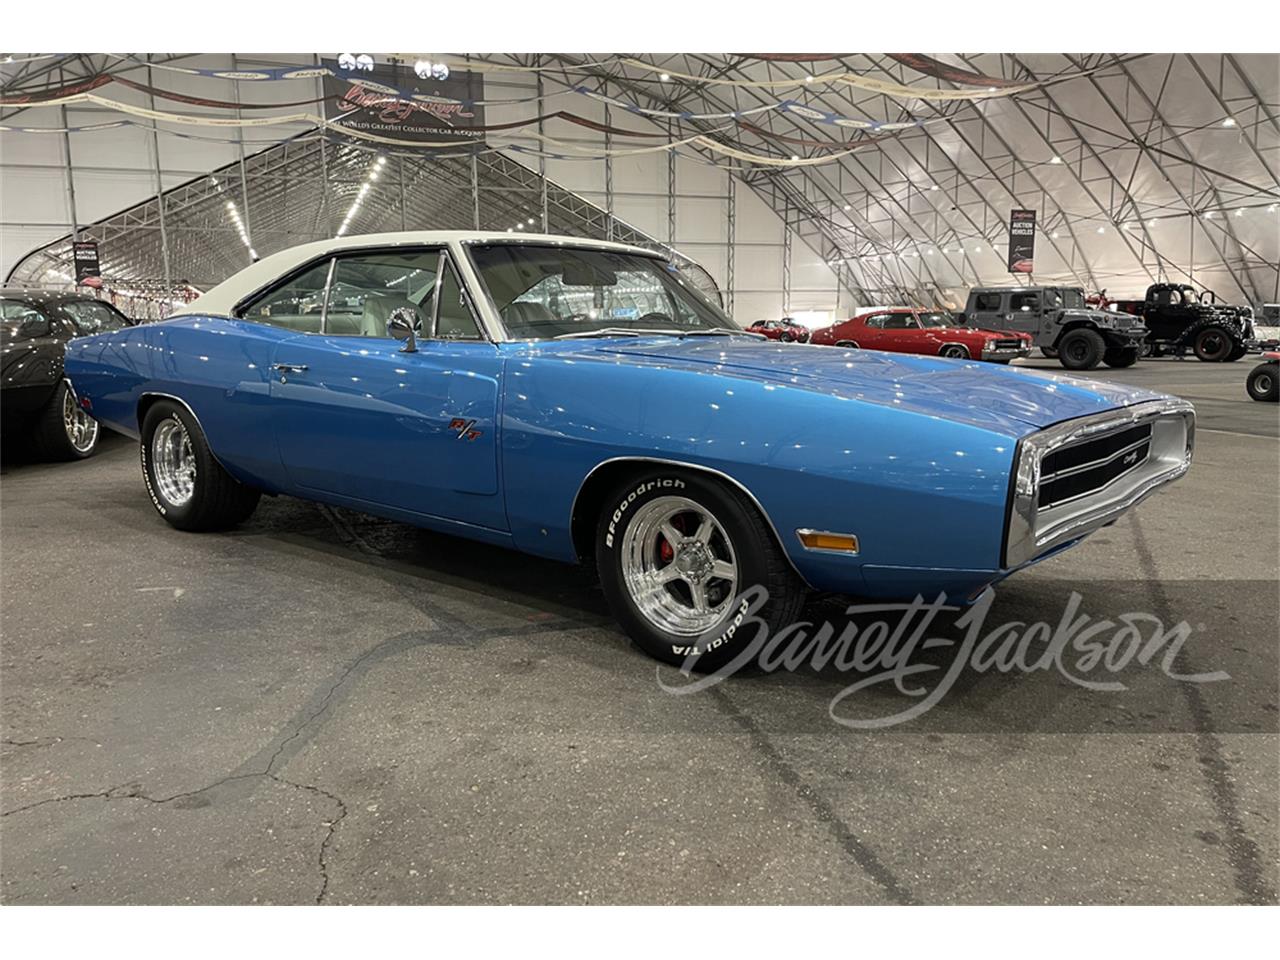 For Sale at Auction: 1970 Dodge Charger in Scottsdale, Arizona for sale in Scottsdale, AZ